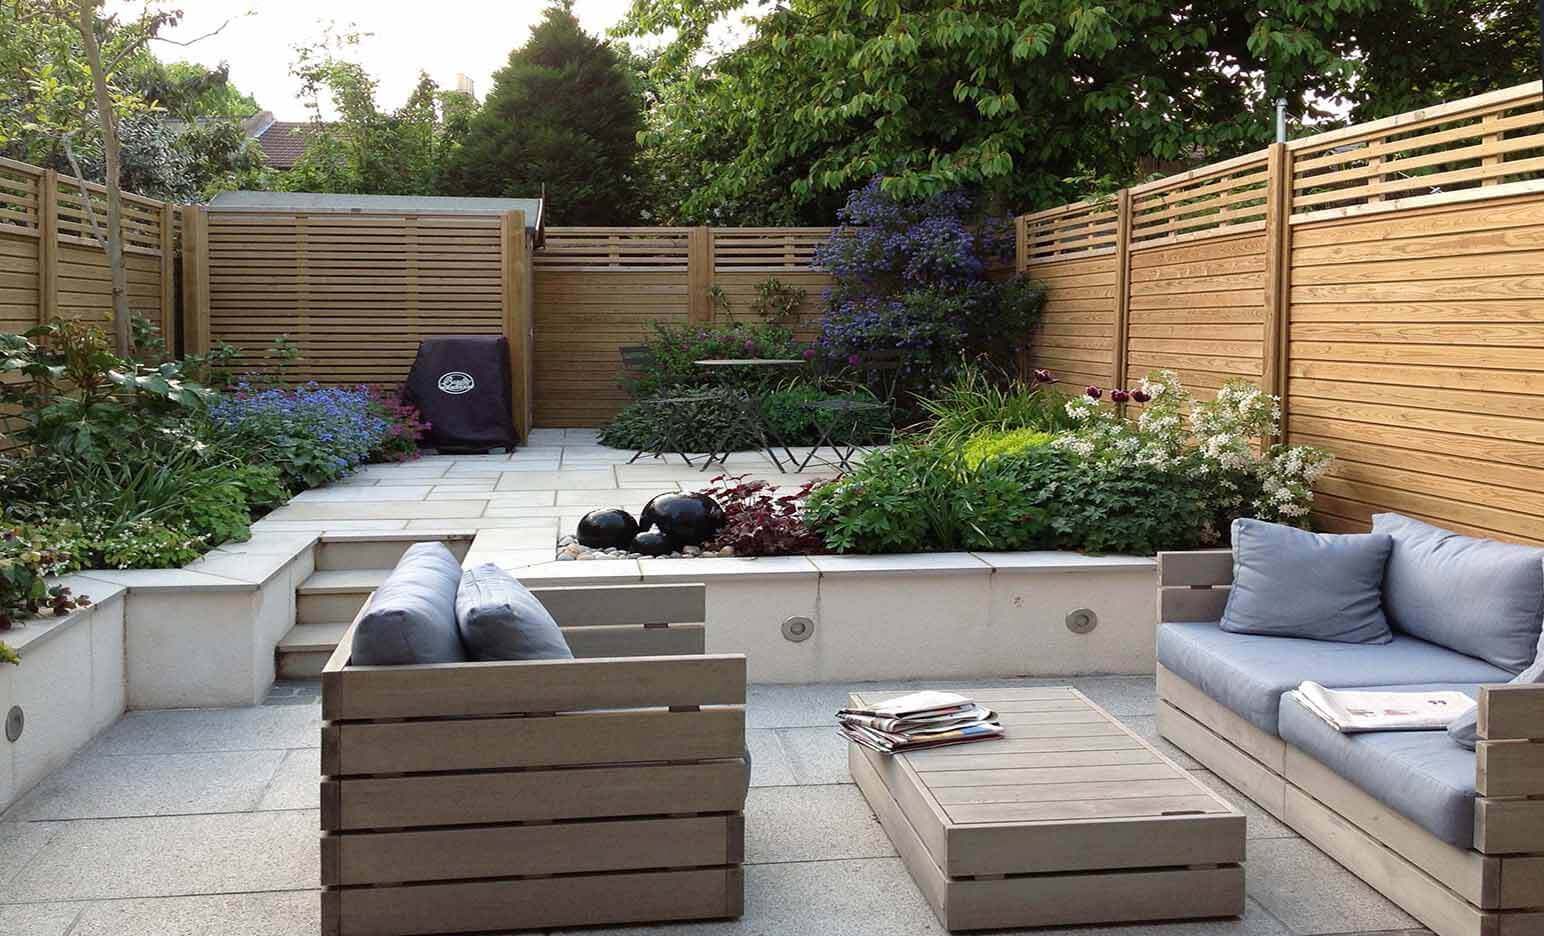 Solid privacy fence panels with slatted top